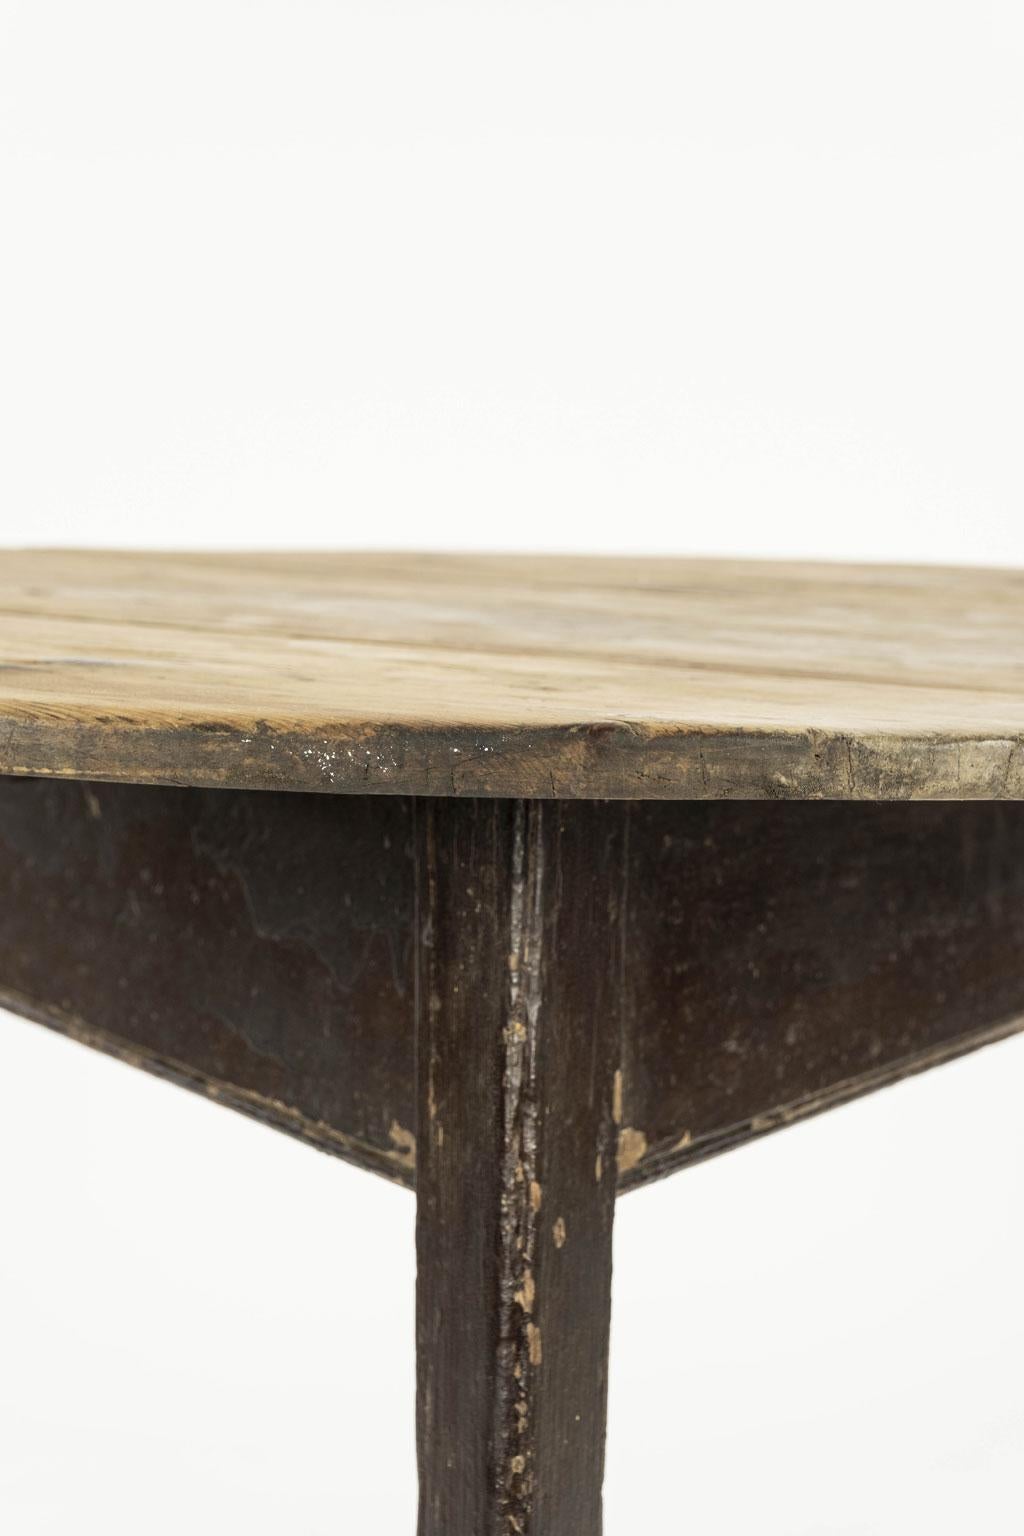 English cricket table in pine, dating to mid-19th century. Scrubbed round top supported by brown painted three-legged base. Brown painted finish is early. Some losses to finish.